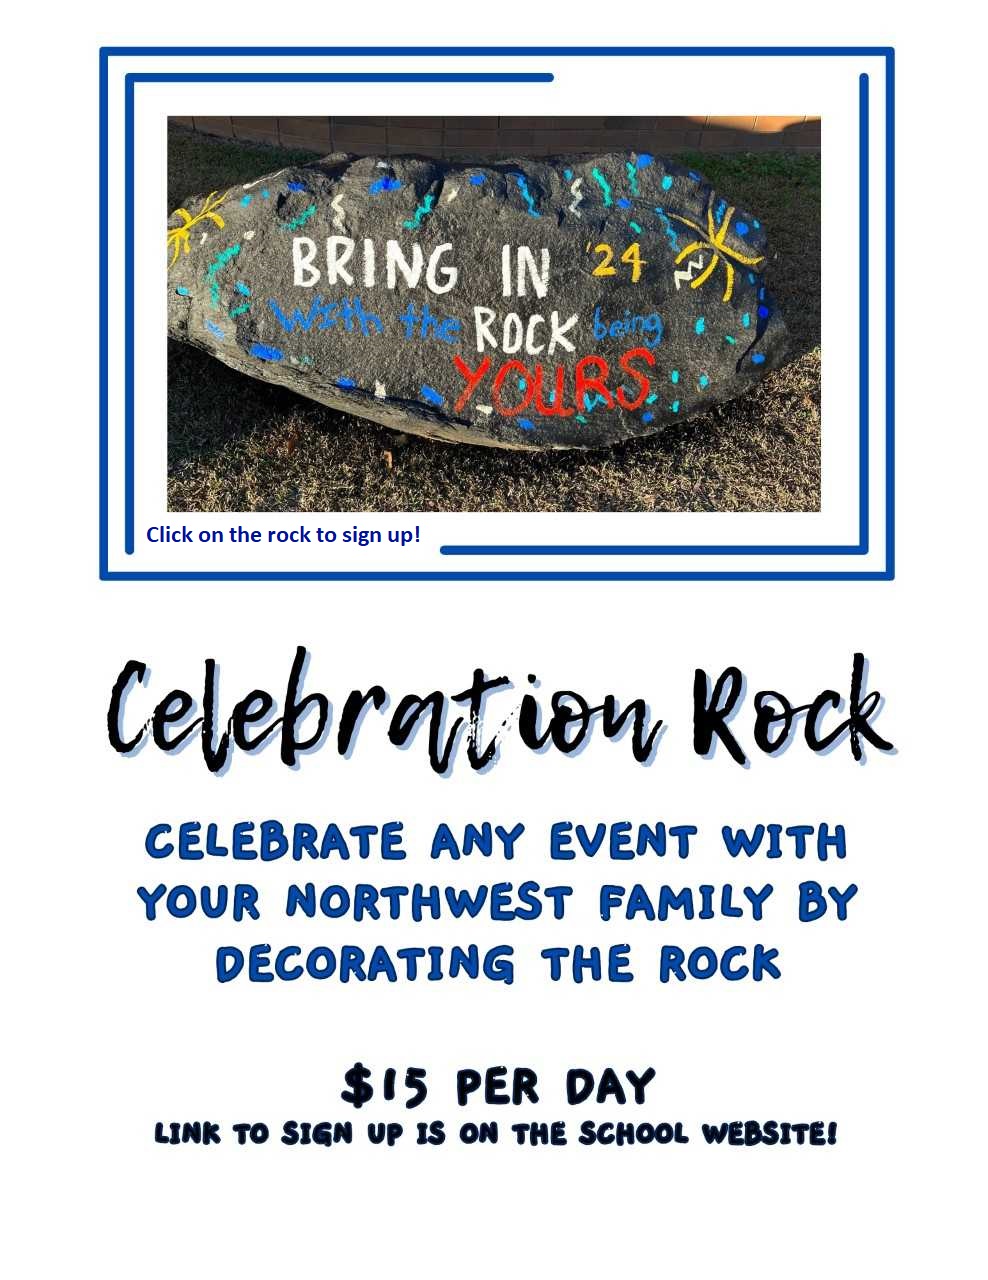 Celebration Rock - Celebrate any event with your Northwest Family by decorating the rock. $15 per day